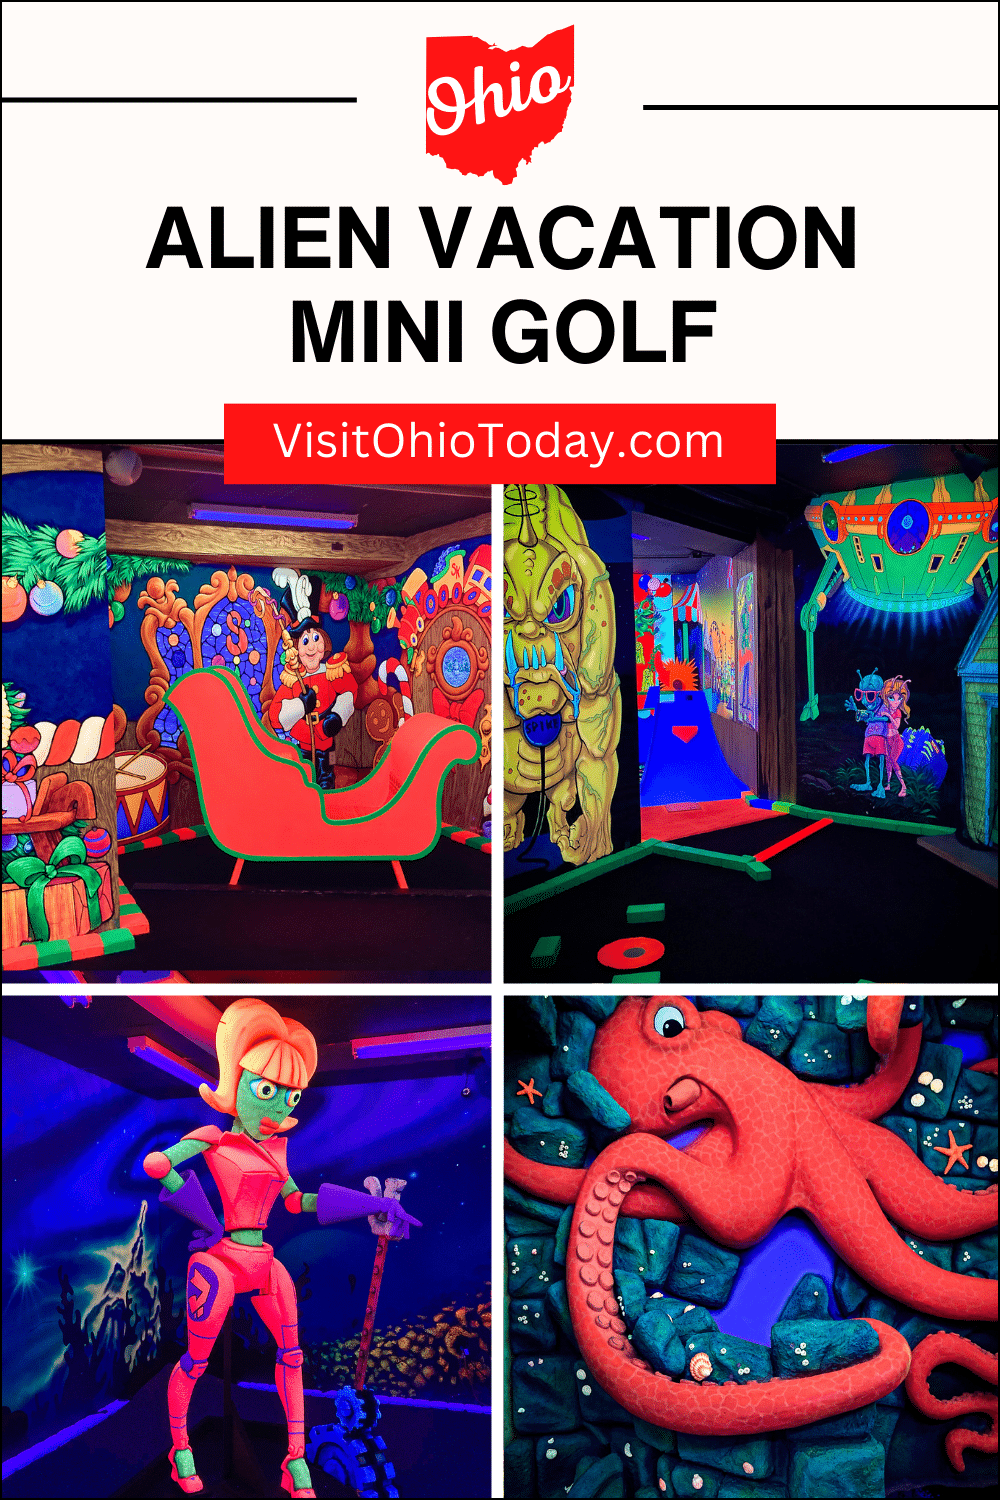 Alien Vacation Mini Golf is a blacklight 3D mini golf and sci-fi movie museum in one, owned by Mark and Dana Klaus and designed by Mark himself, in Medina. Grab a ball and club, and play 18 holes of freaky blacklight mini golf in 3D!